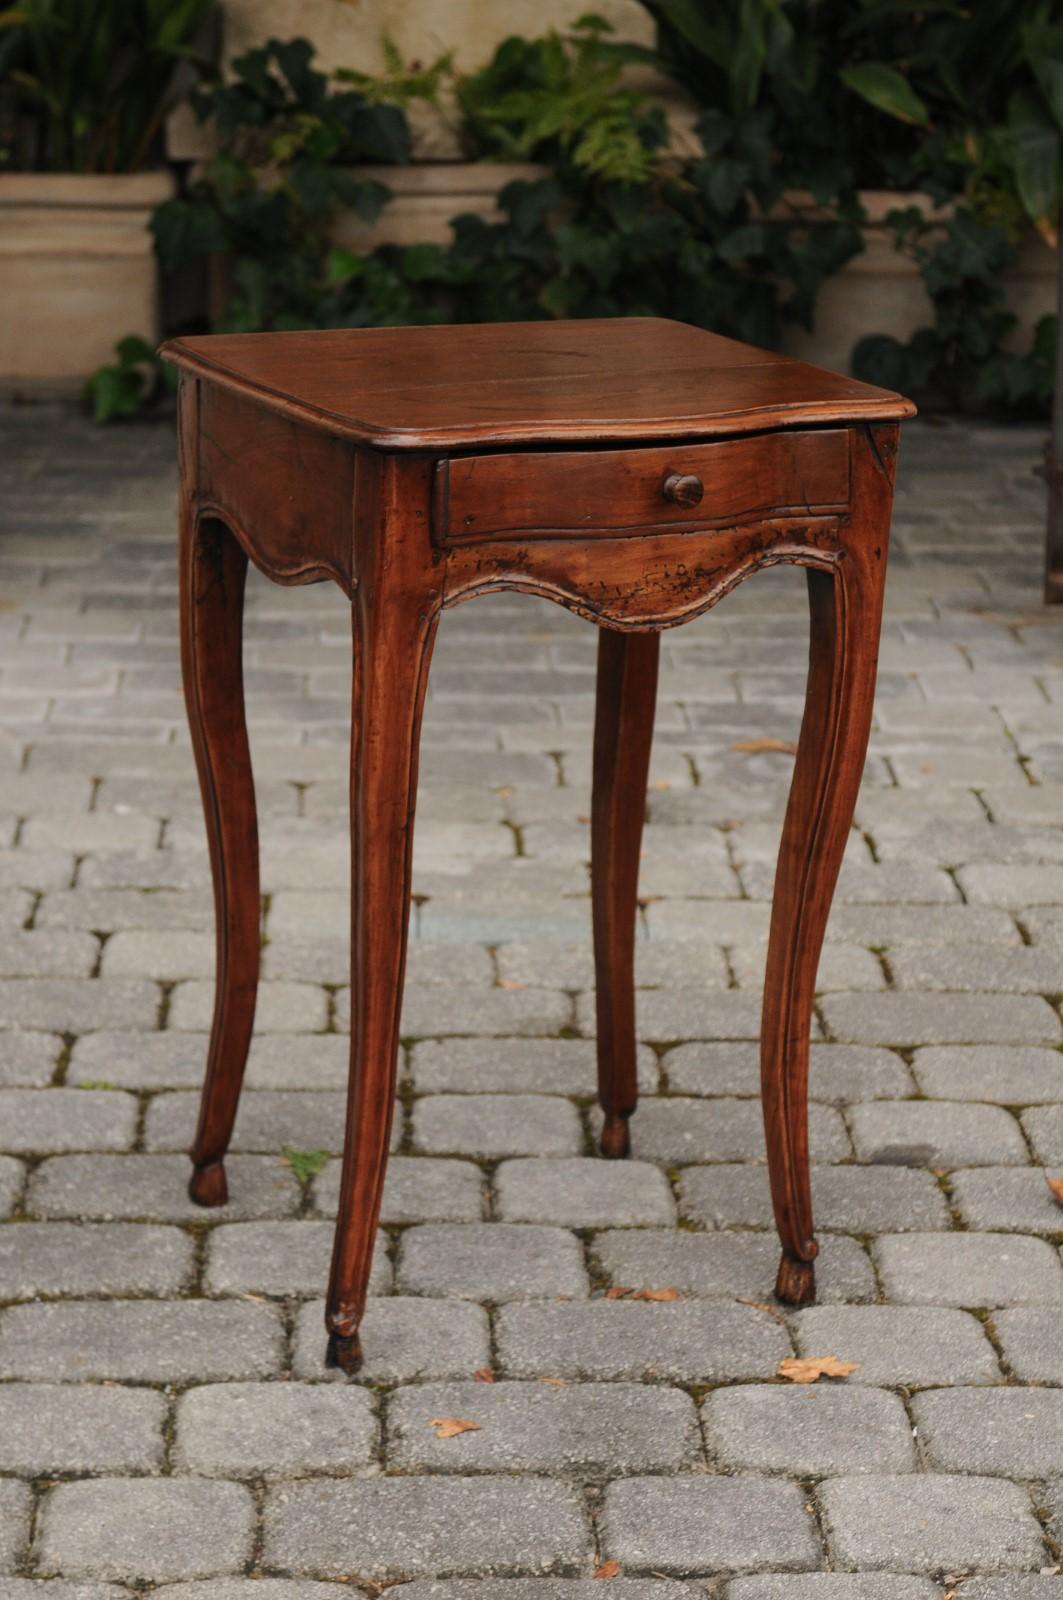 A French Louis XV style walnut side table from the early 19th century, with single drawer and scalloped apron. Born during the first French Empire, this delicate walnut table features a rectangular planked top with beveled edges and serpentine